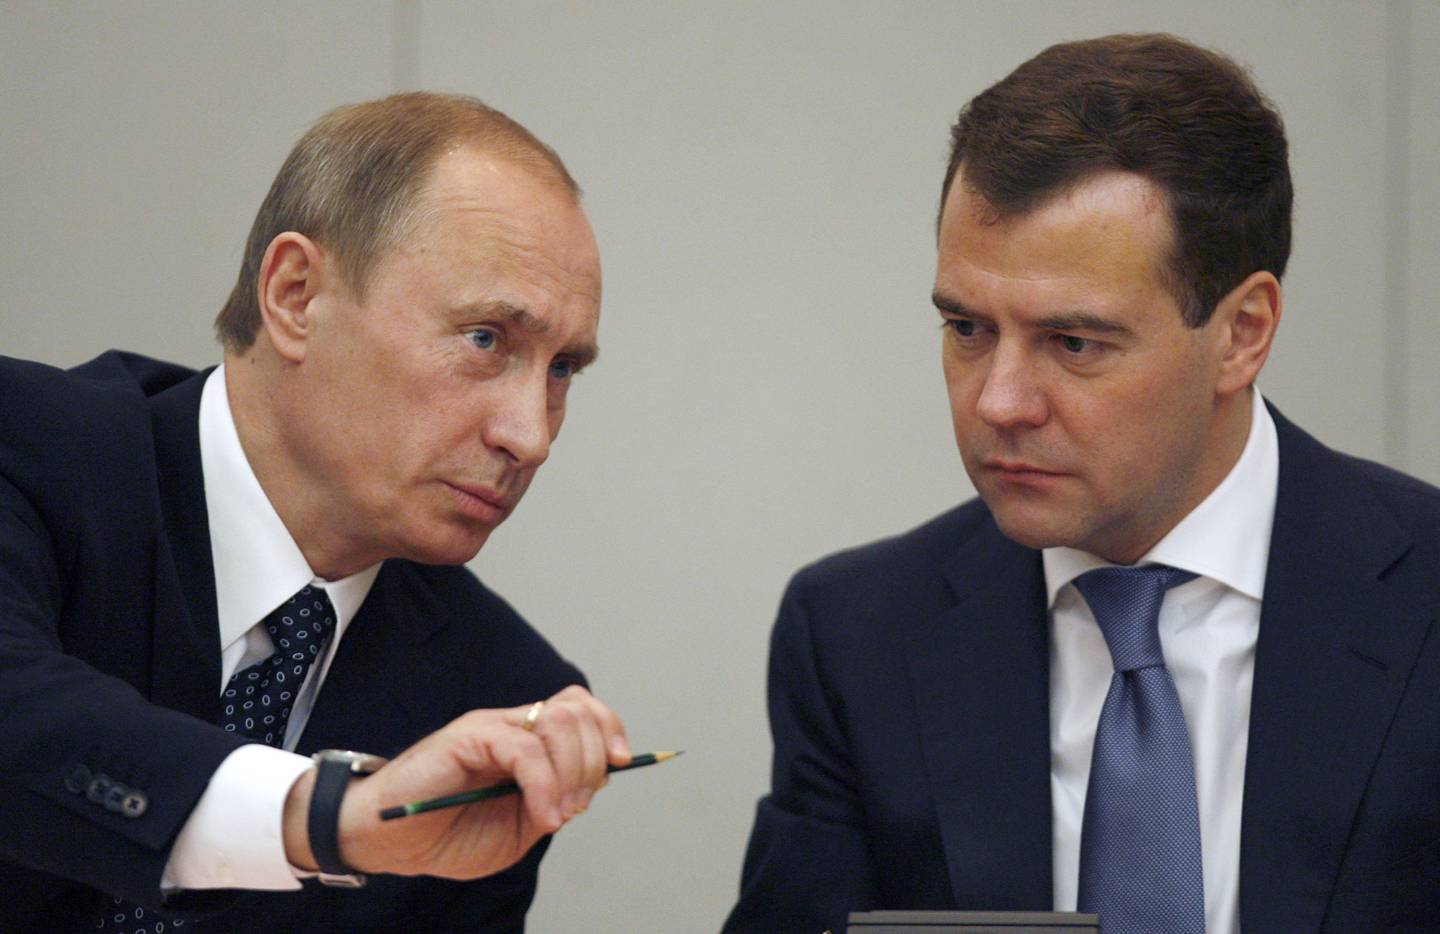 FILE - Russian President Dmitry Medvedev, right, listens to Russian former president Vladimir Putin, during a discussion in the State Duma, lower parliament chamber, in Moscow on May 8, 2008. Barred by the constitution from running for a third consecutive term, Putin is appointed prime minister by new President Dmitry Medvedev but effectively remains Russia's political leader. (AP Photo/ Mikhail Metzel, Pool, File)